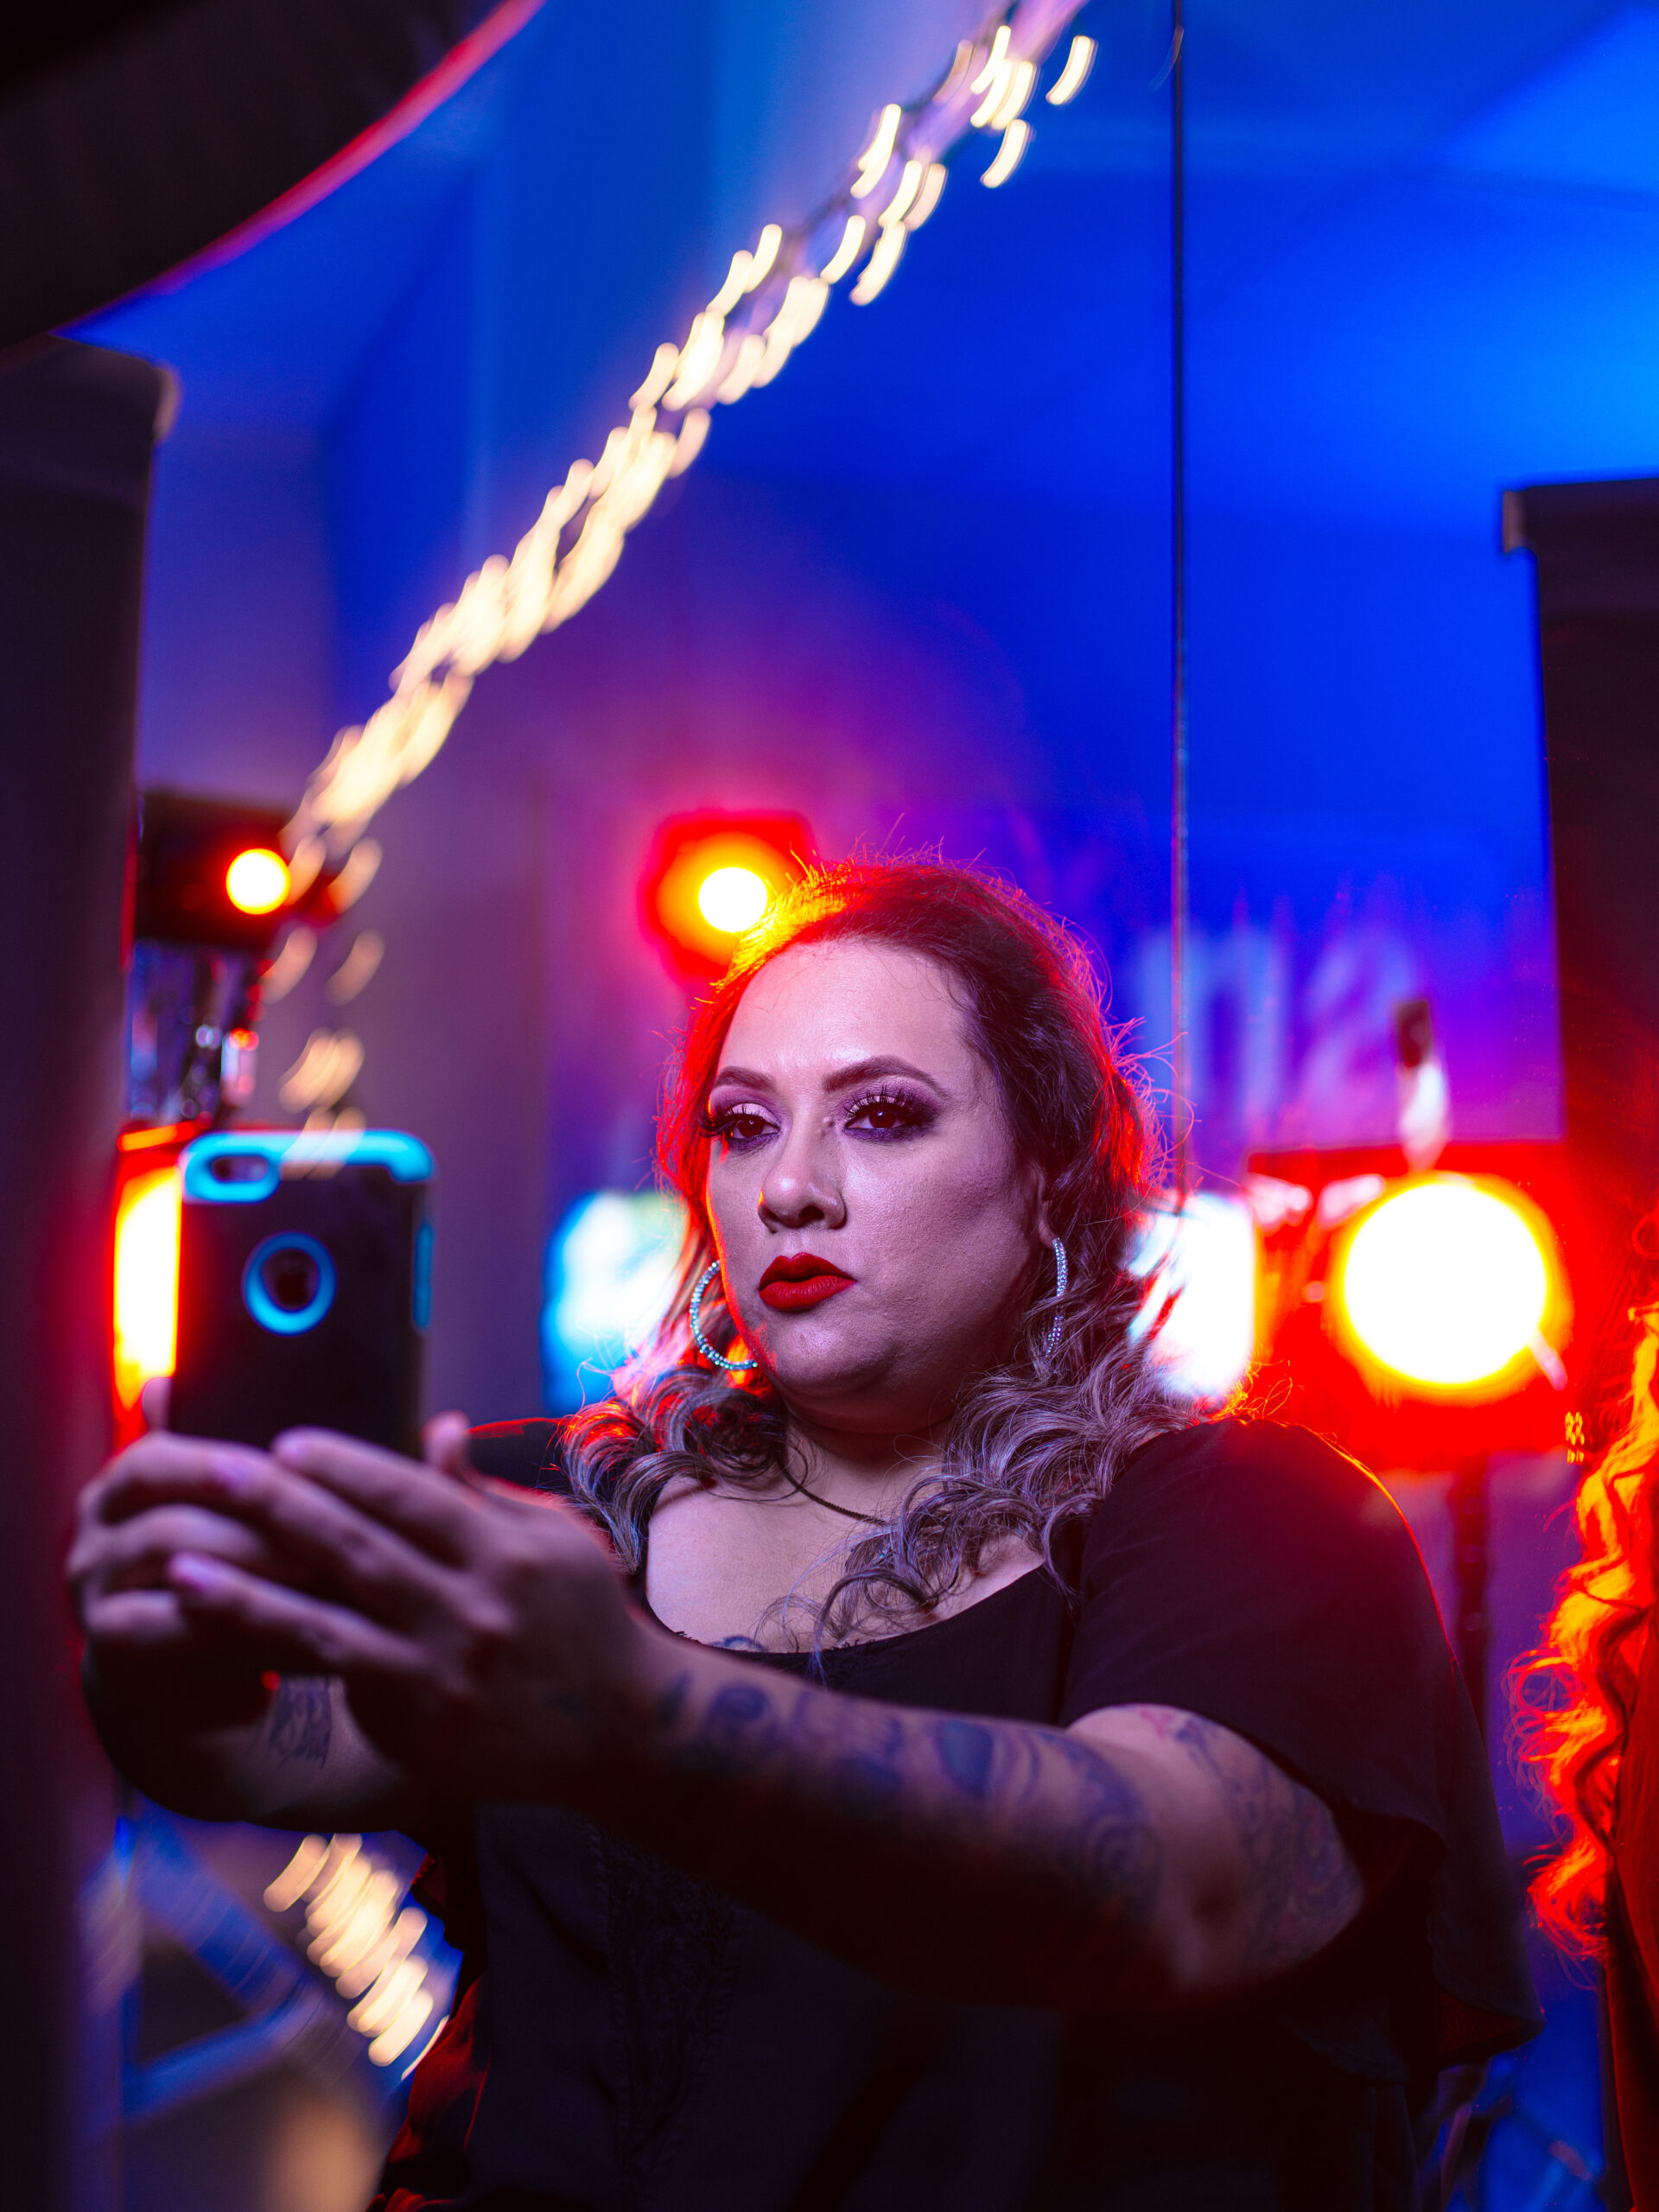 In a moodily lit, starkly colored night time photograph, Priscilla Villarreal takes a selfie on her iPhone. She's a Latino woman in a black scoop neck shirt, with wave hair with blond highlights, wearing bold red lipstick and eye liner.